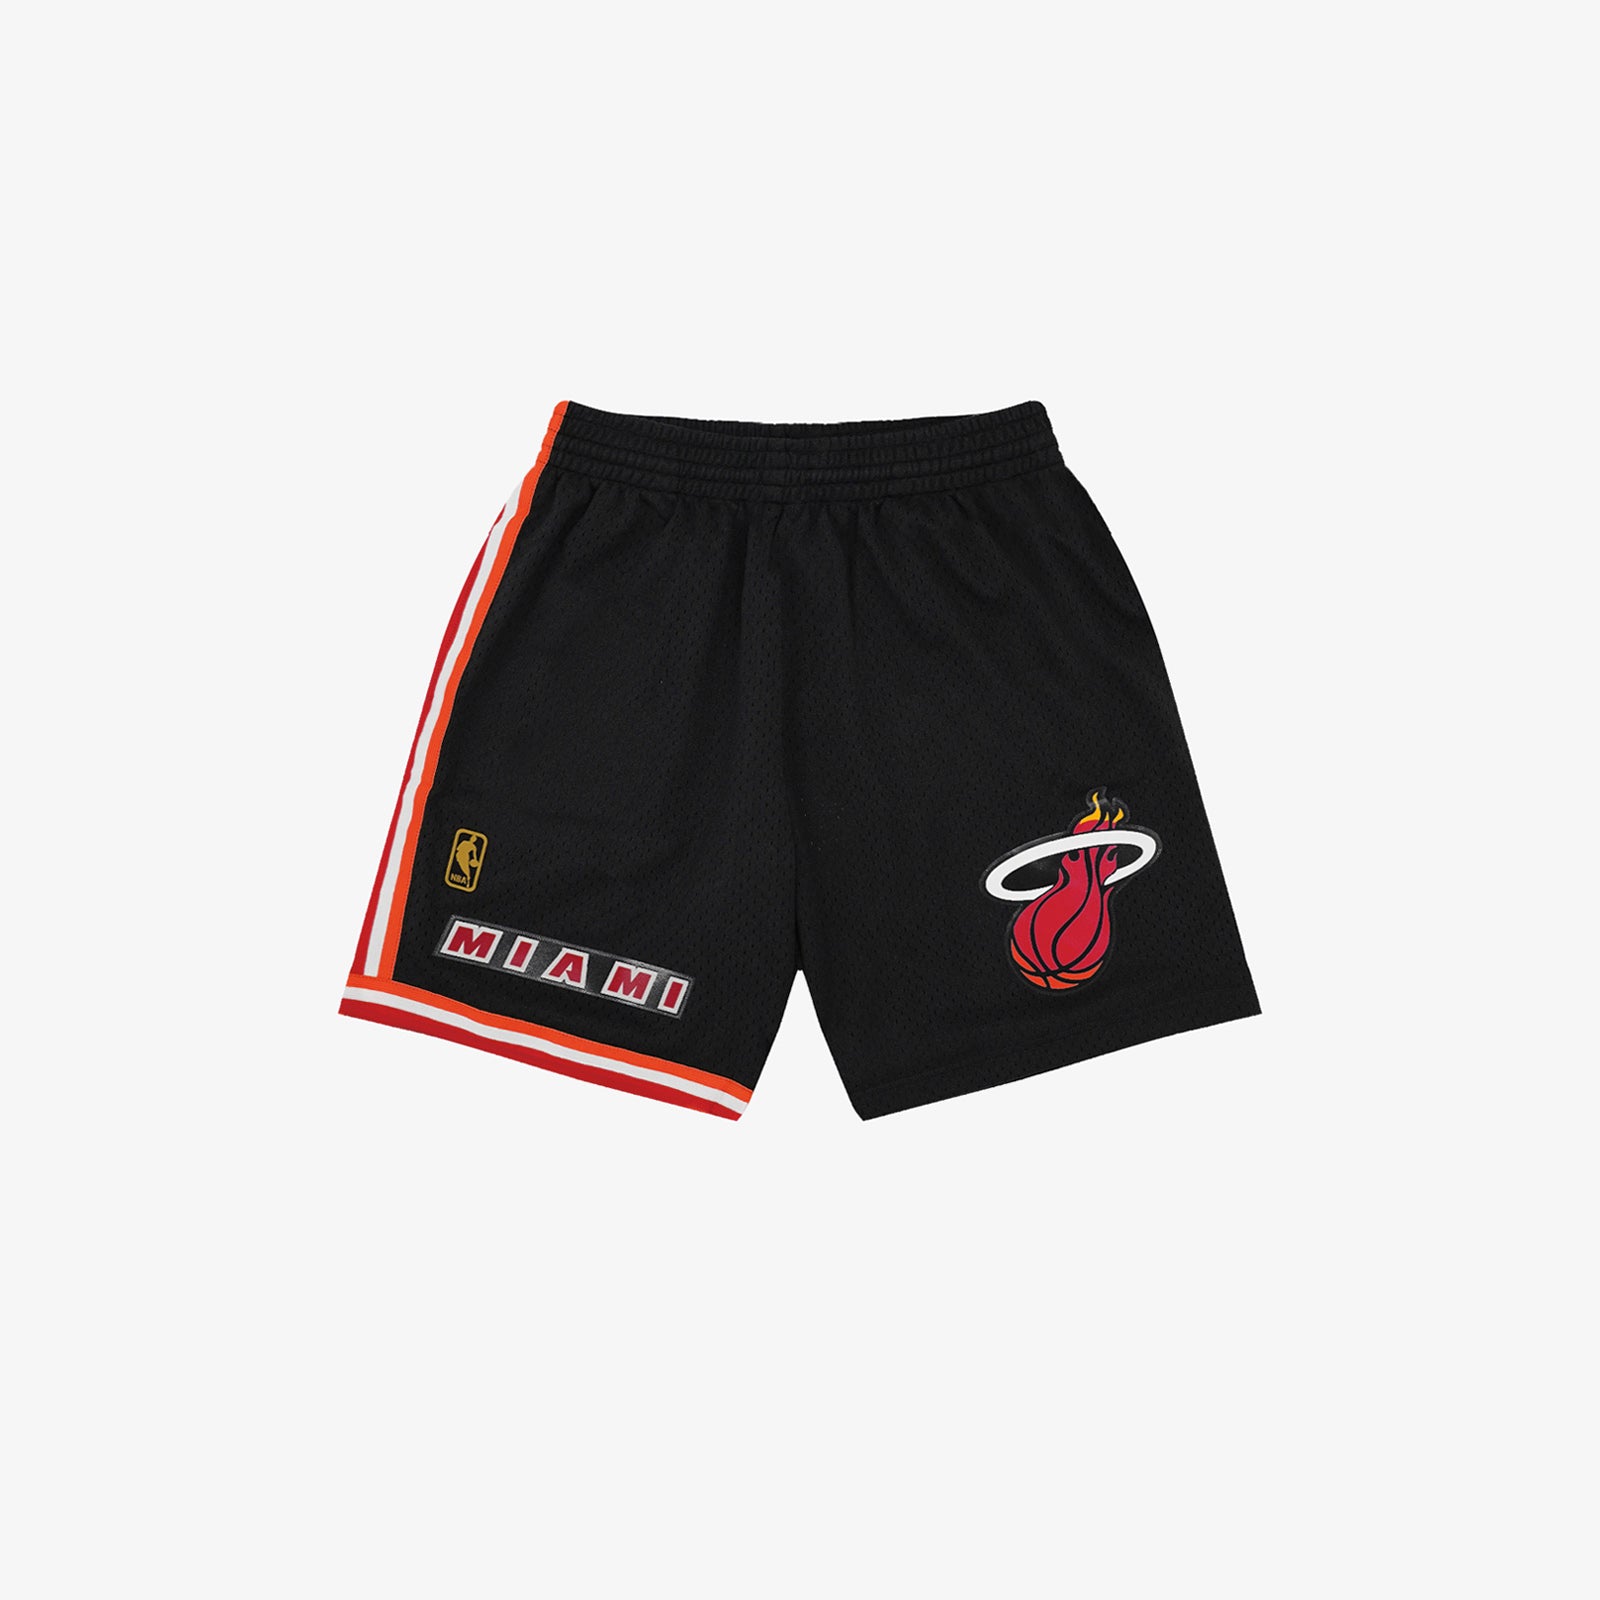 Who wears short shorts? The Heat — and a growing number in the NBA